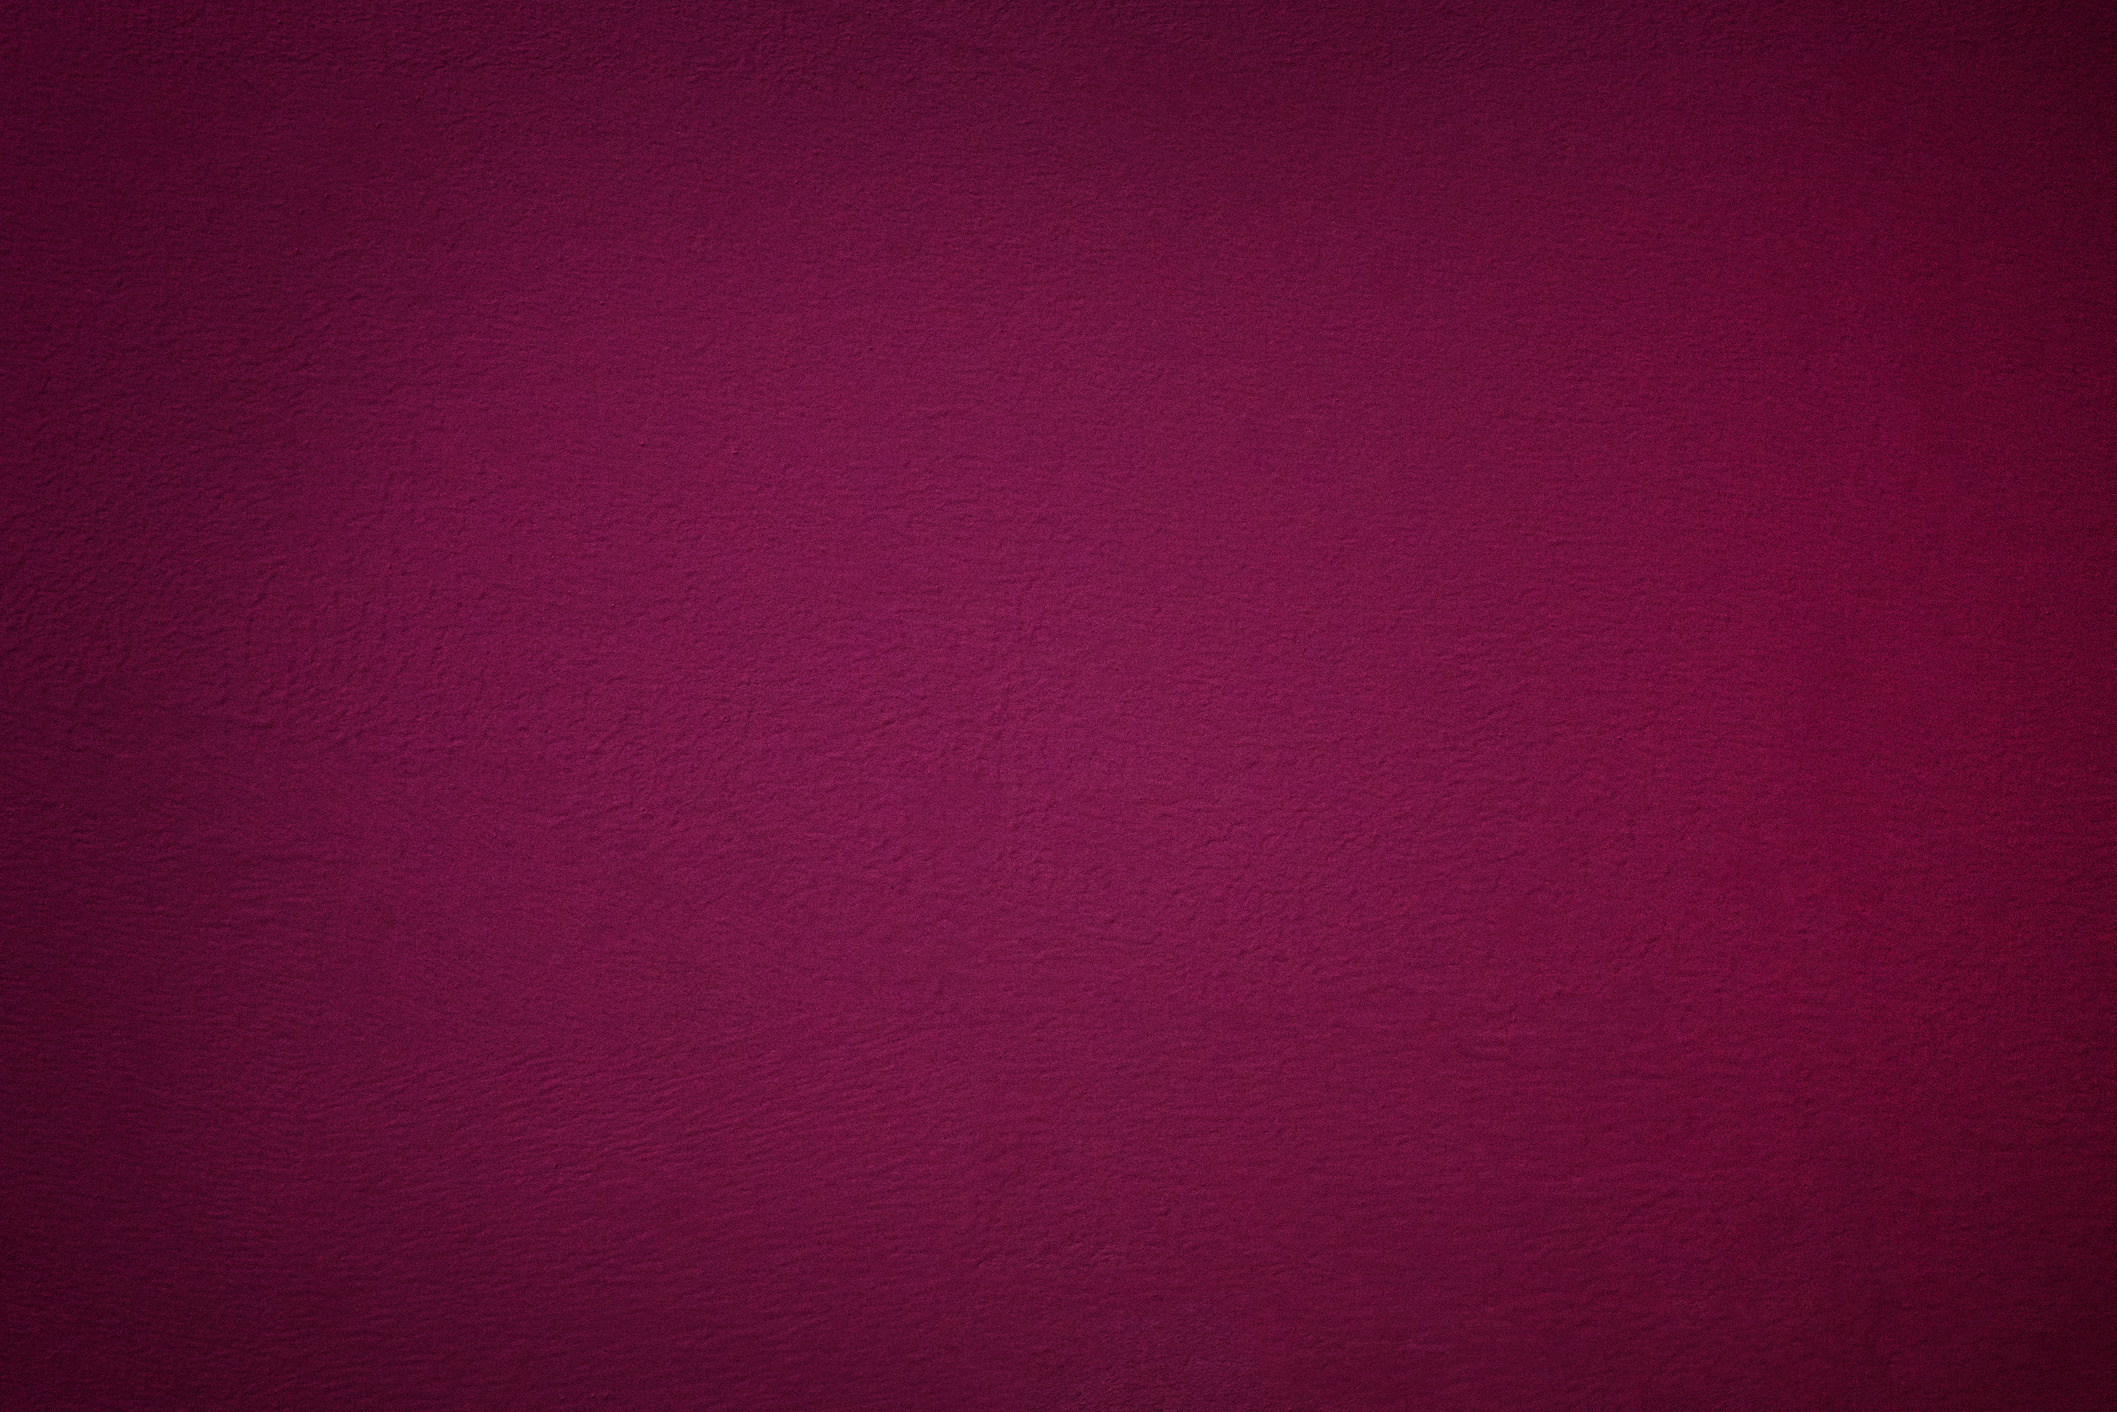 wine color background in high resolution